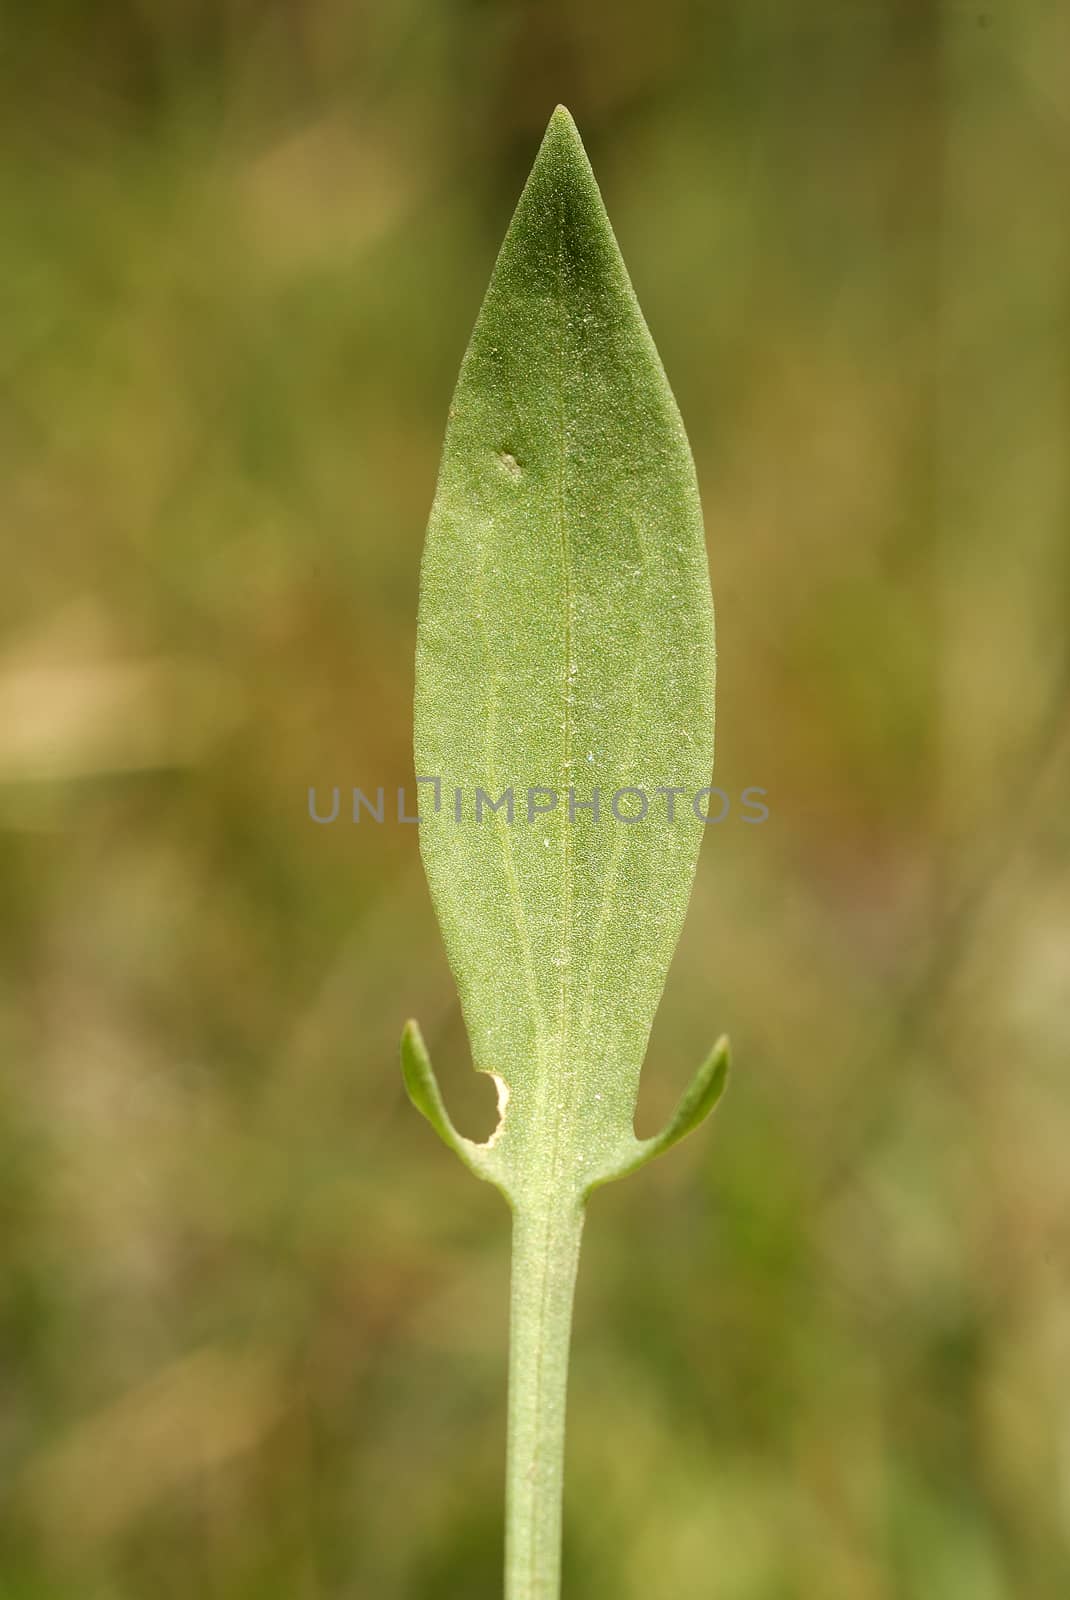 Rumex acetosella, Allergens Plants by jalonsohu@gmail.com